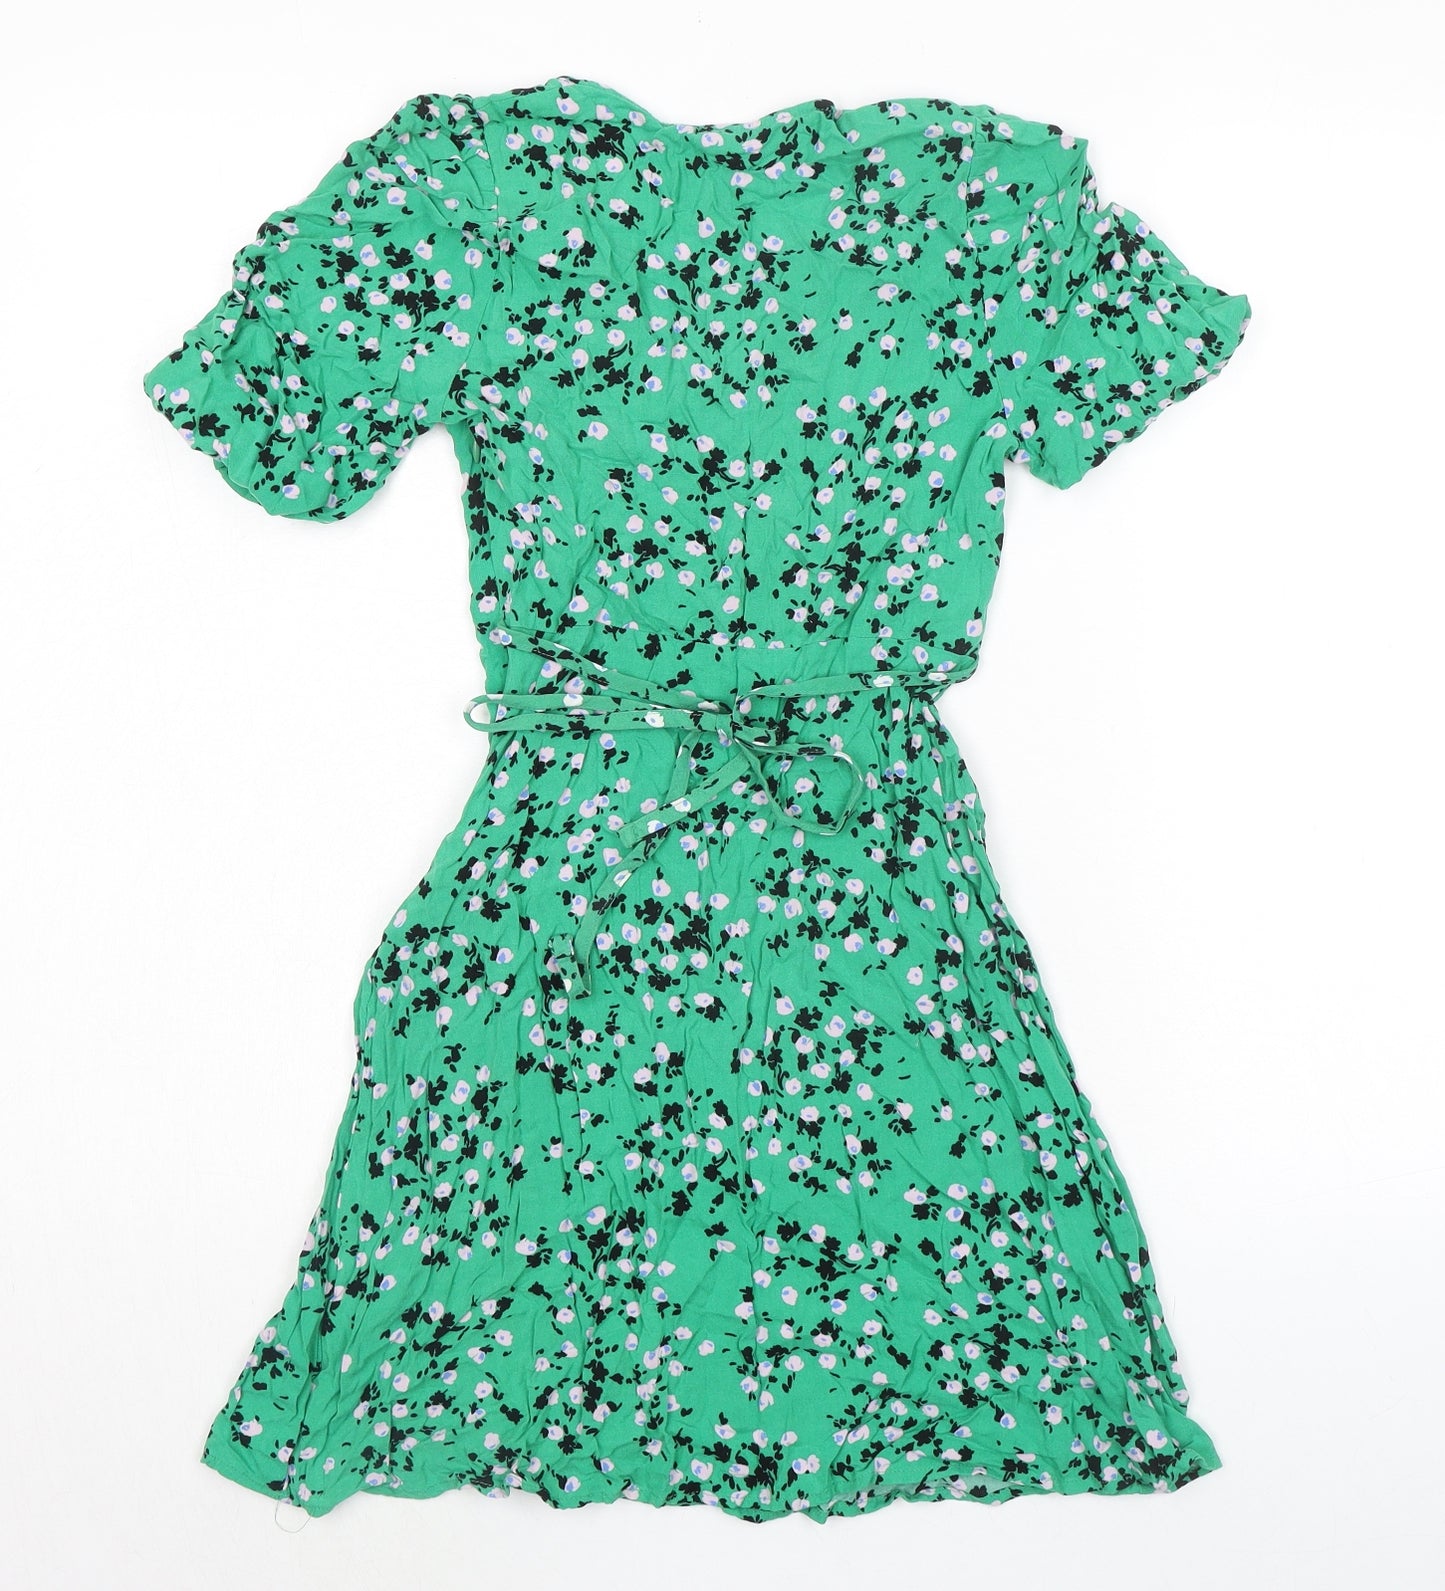 New Look Womens Green Floral Viscose Skater Dress Size 8 V-Neck Zip - Rouched Bodice